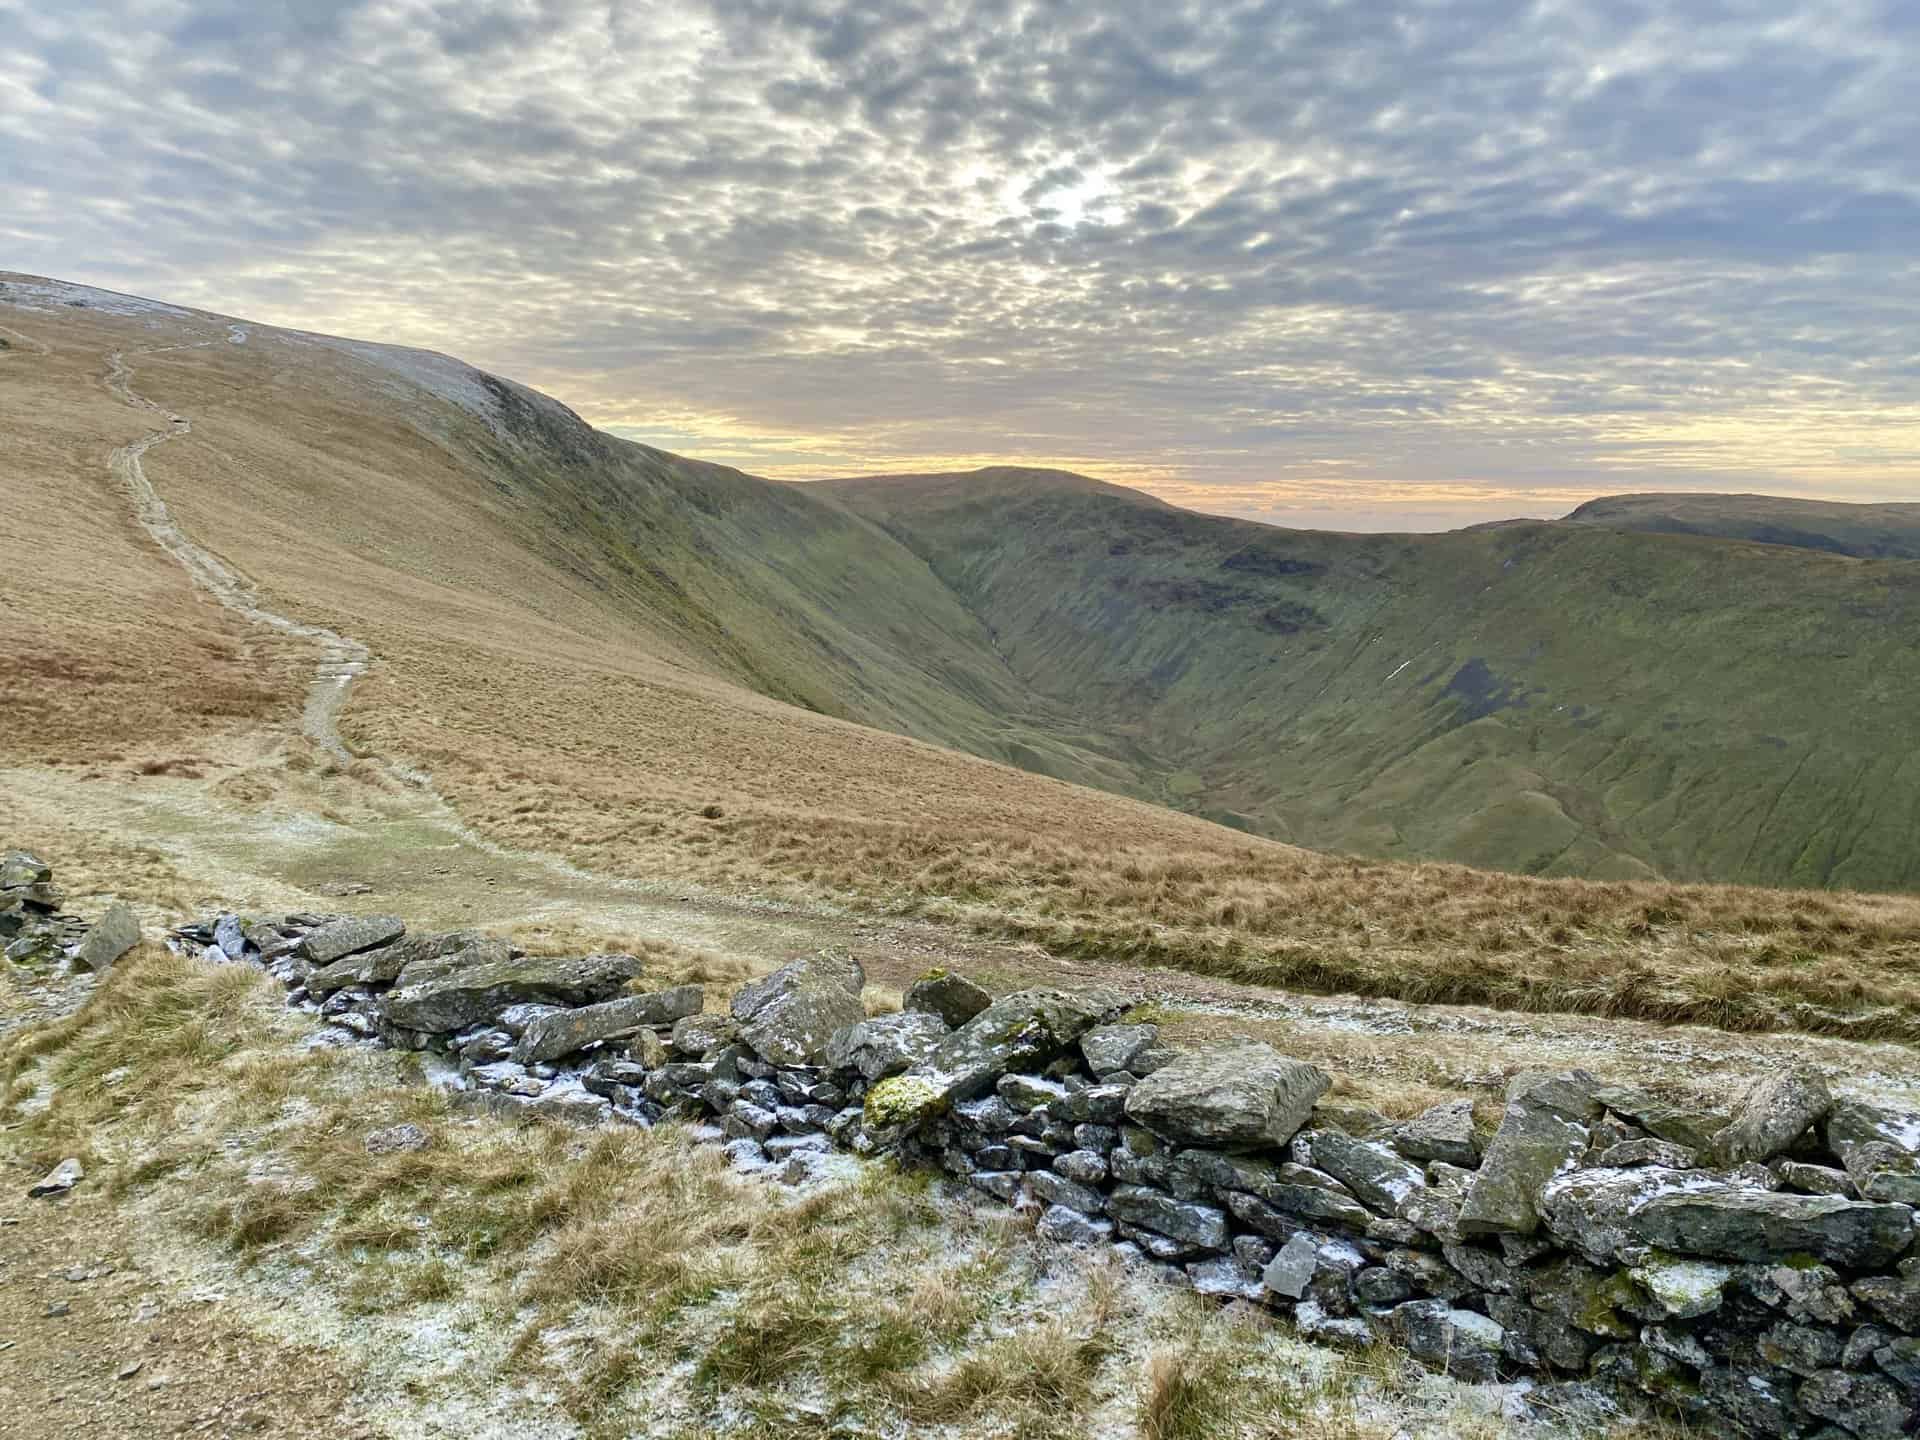 Looking back towards Thornthwaite Crag (horizon, centre) at the head of the Hayeswater Gill valley between High Street and Gray Crag.